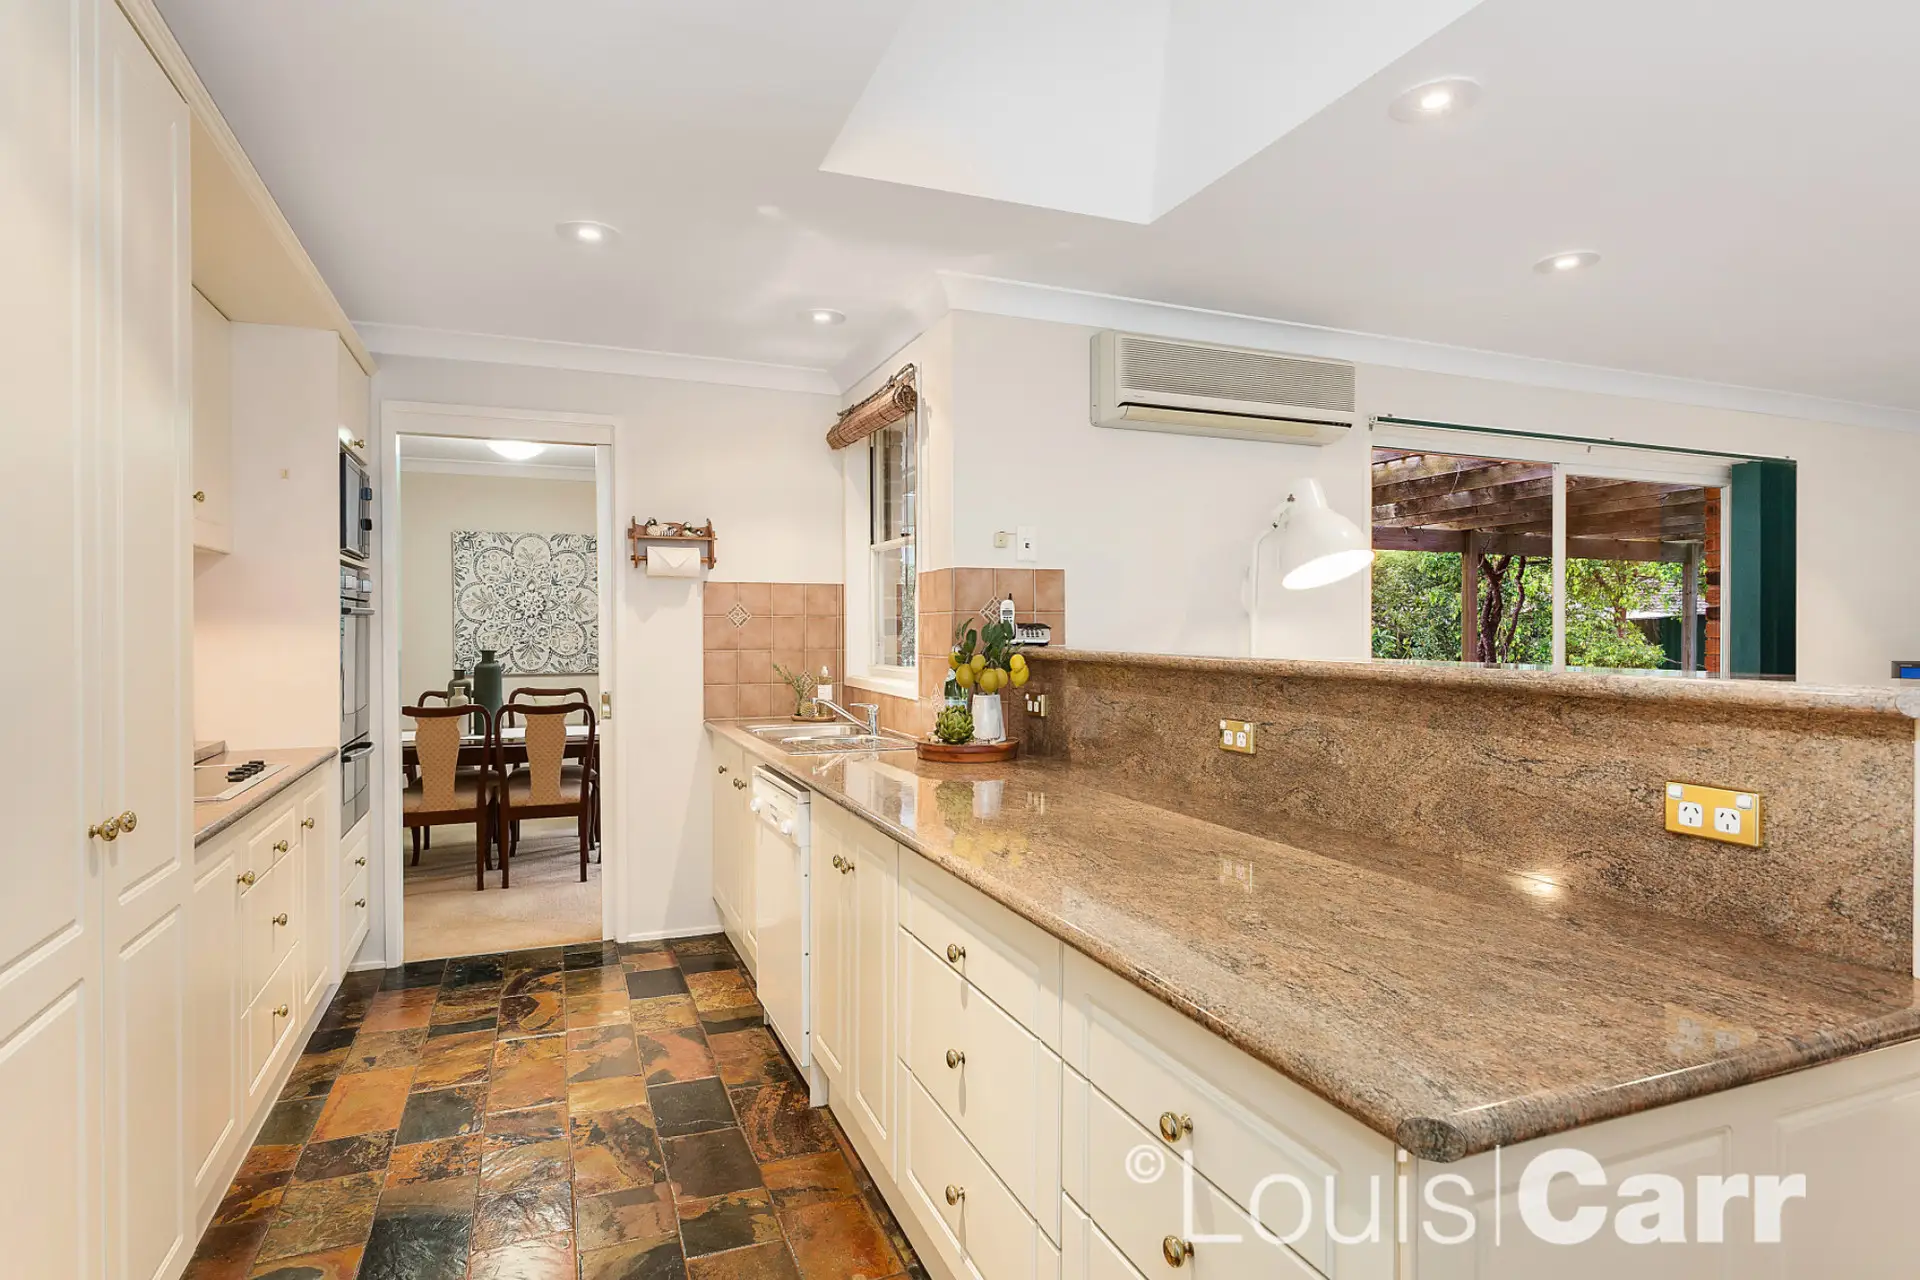 Photo #5: 6 Crackenback Court, Glenhaven - Sold by Louis Carr Real Estate